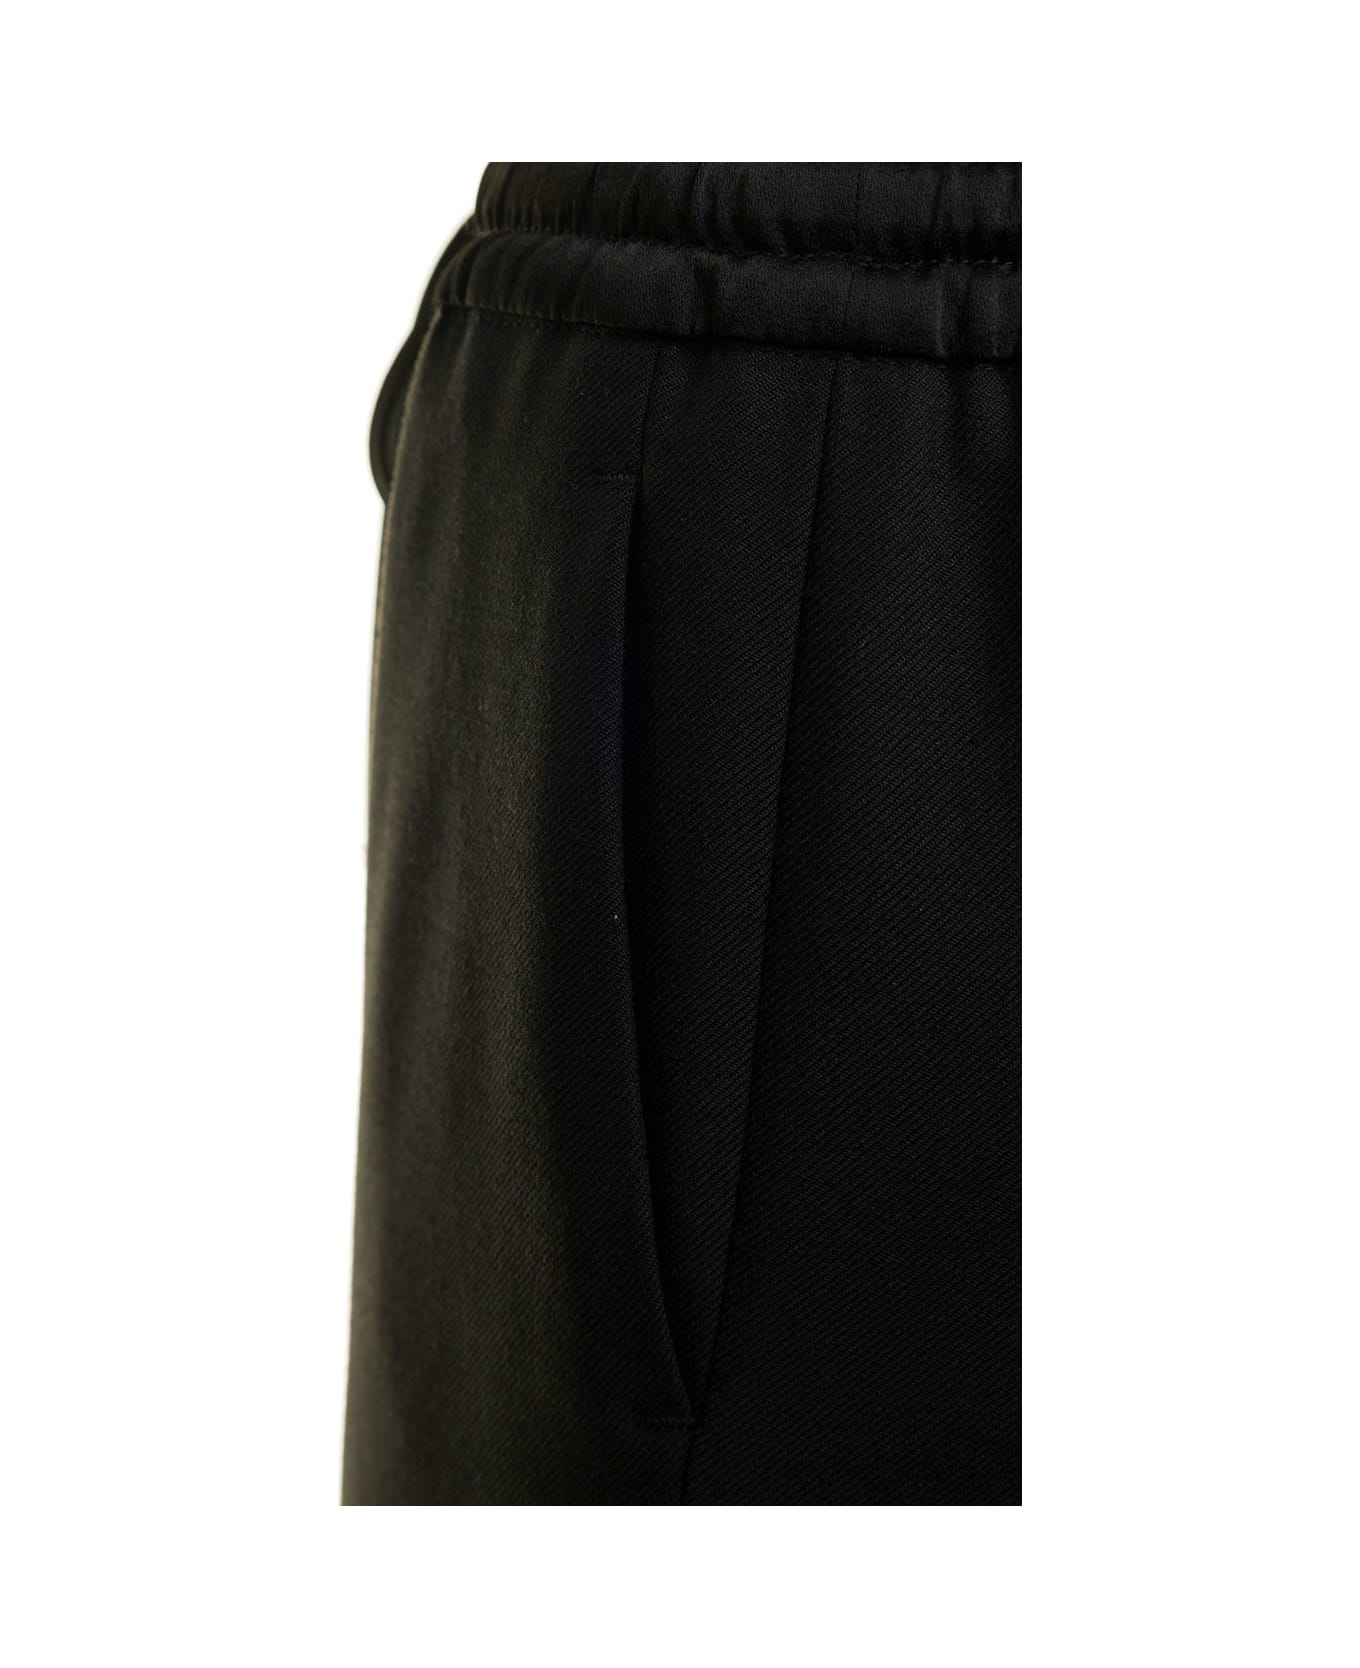 TwinSet Black Wool Trousers With Drawstring Twin Set Woman - Black